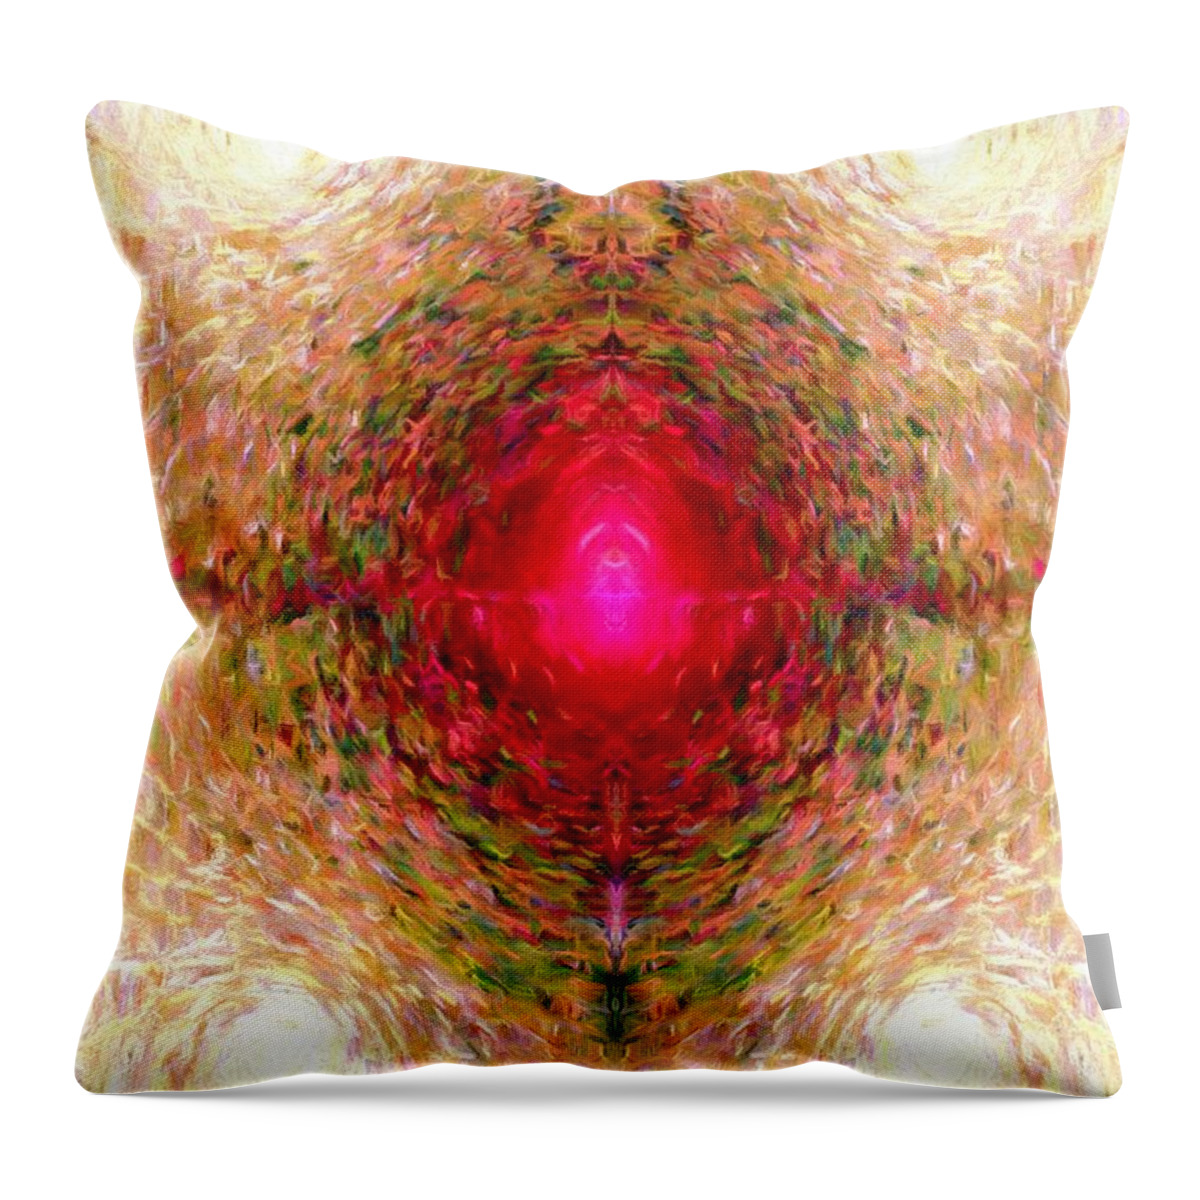 Abstract Throw Pillow featuring the digital art Vivid Nodes by Charmaine Zoe